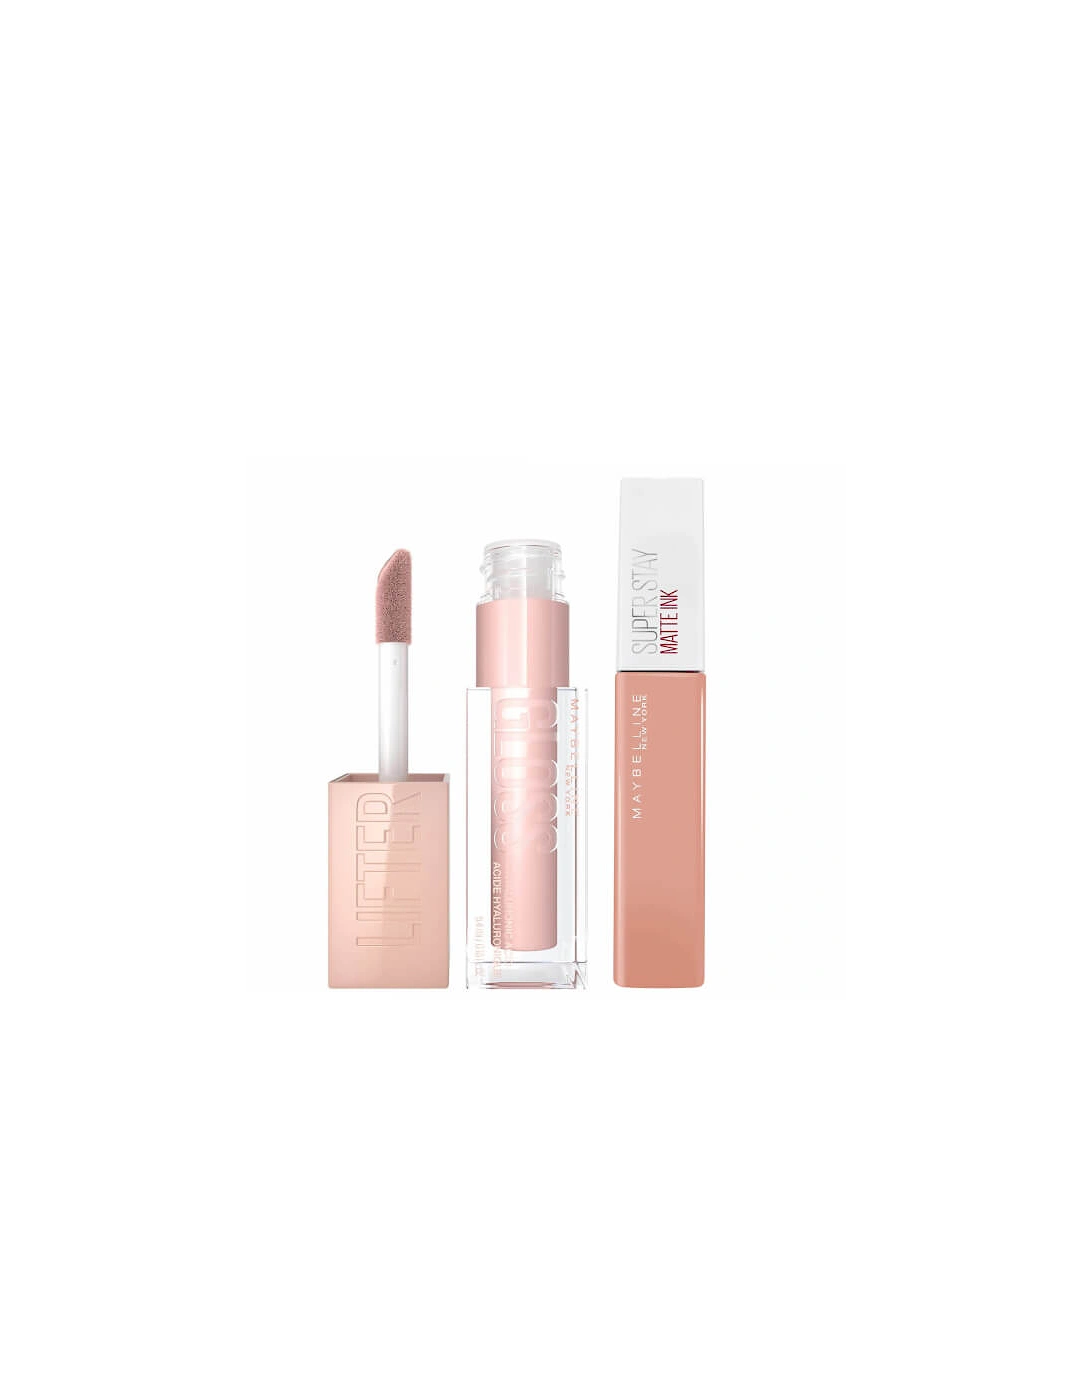 Lifter Gloss and Superstay Matte Ink Lipstick Bundle - 55 Driver, 2 of 1